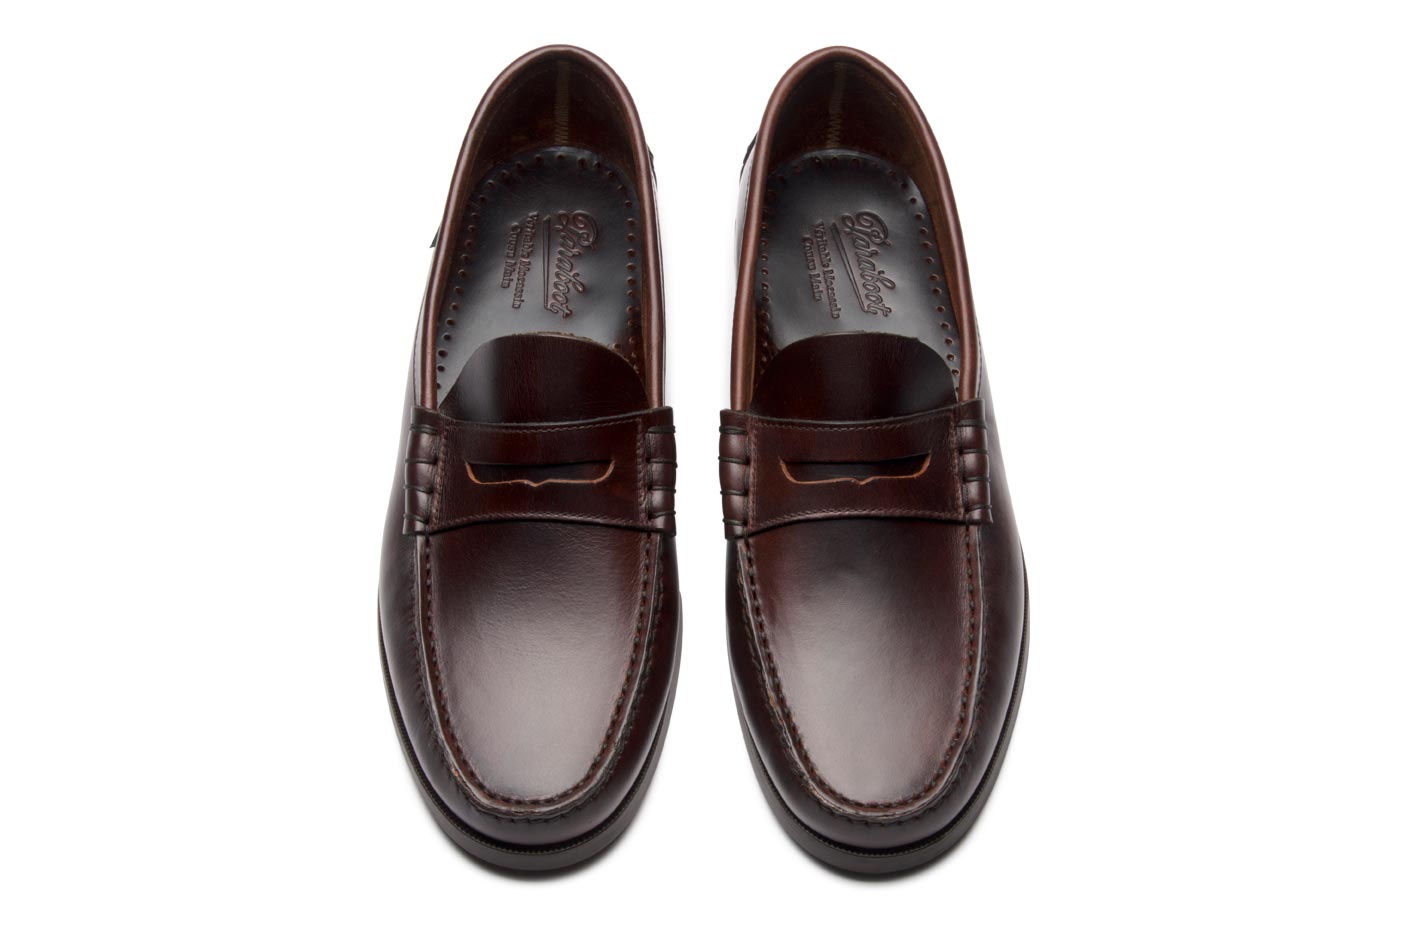 CORAUX/NAVY BROWN-SMOOTH AMERICA | Paraboot